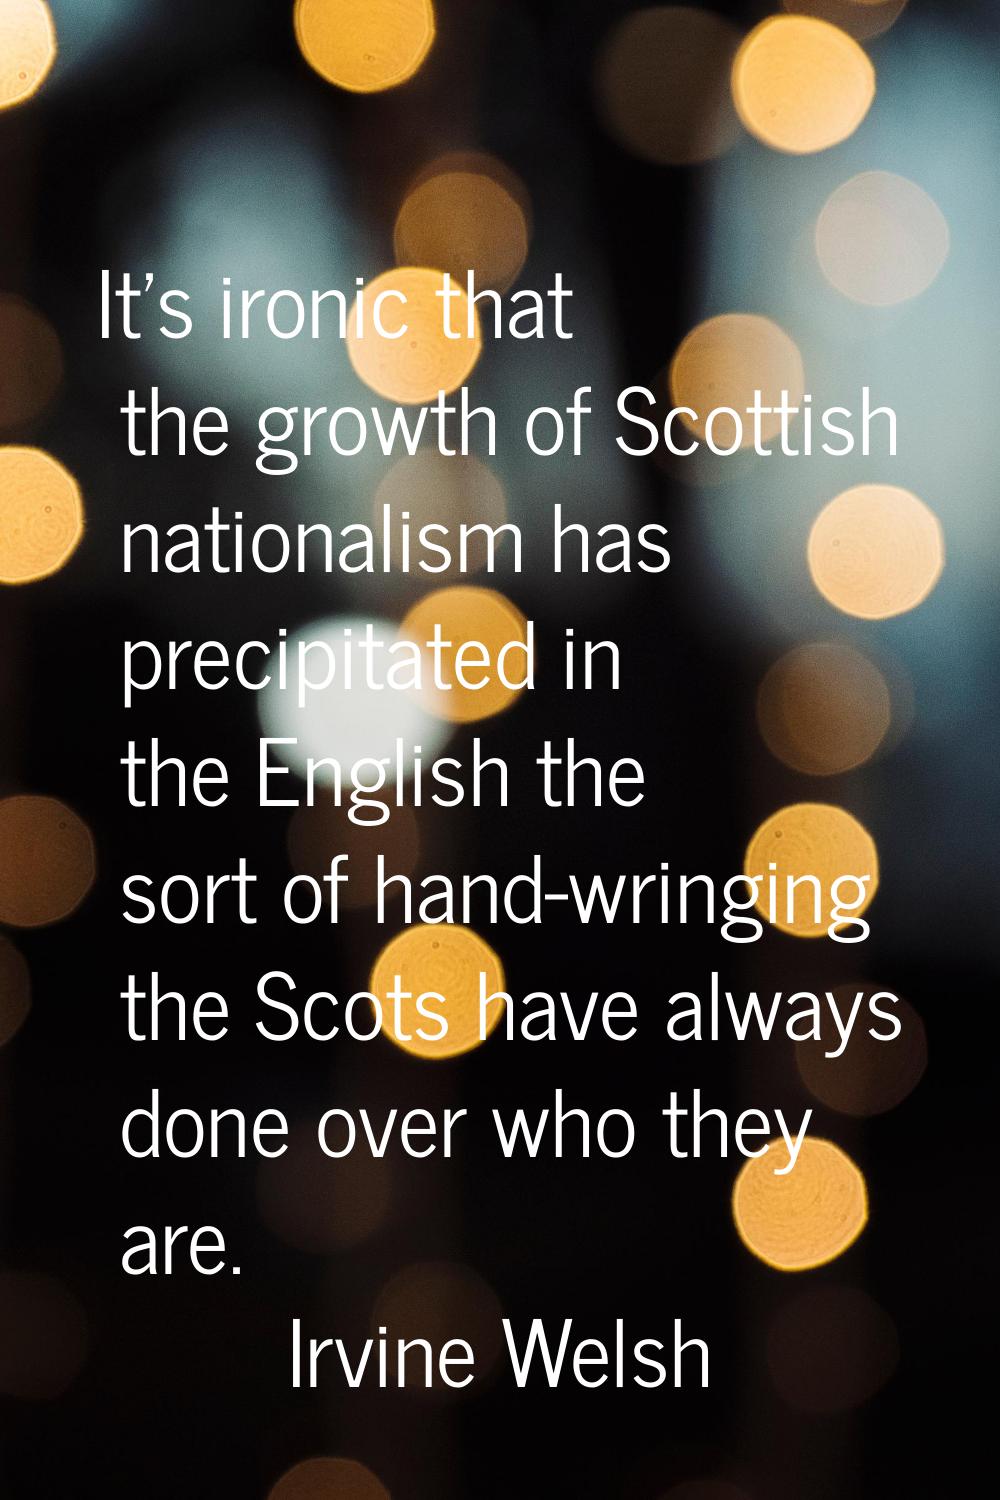 It's ironic that the growth of Scottish nationalism has precipitated in the English the sort of han